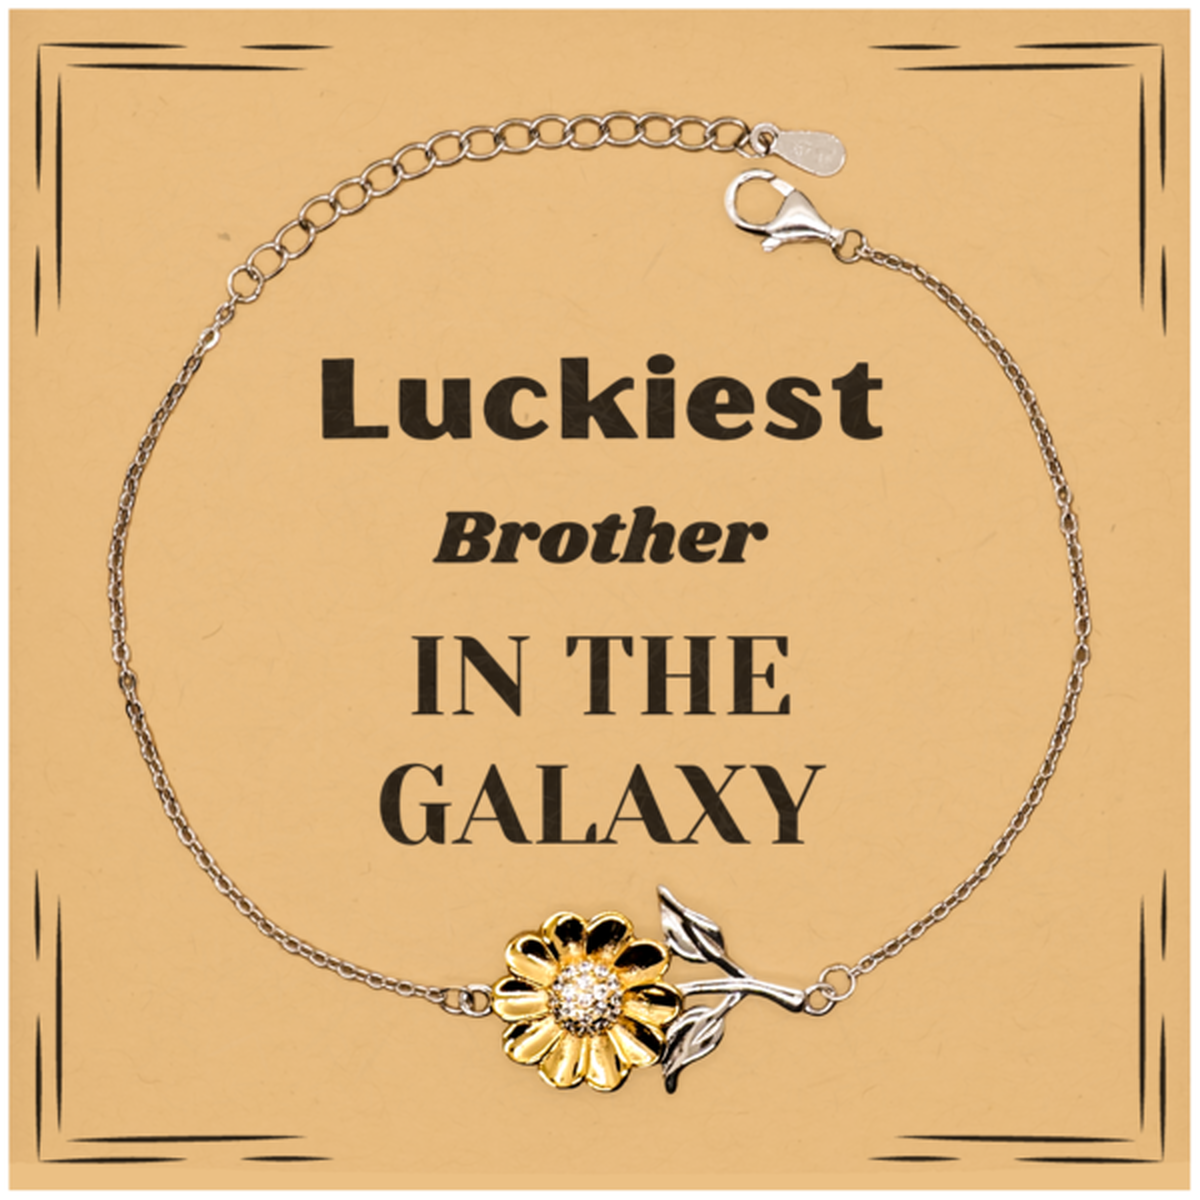 Luckiest Brother in the Galaxy, To My Brother Message Card Gifts, Christmas Brother Sunflower Bracelet Gifts, X-mas Birthday Unique Gifts For Brother Men Women